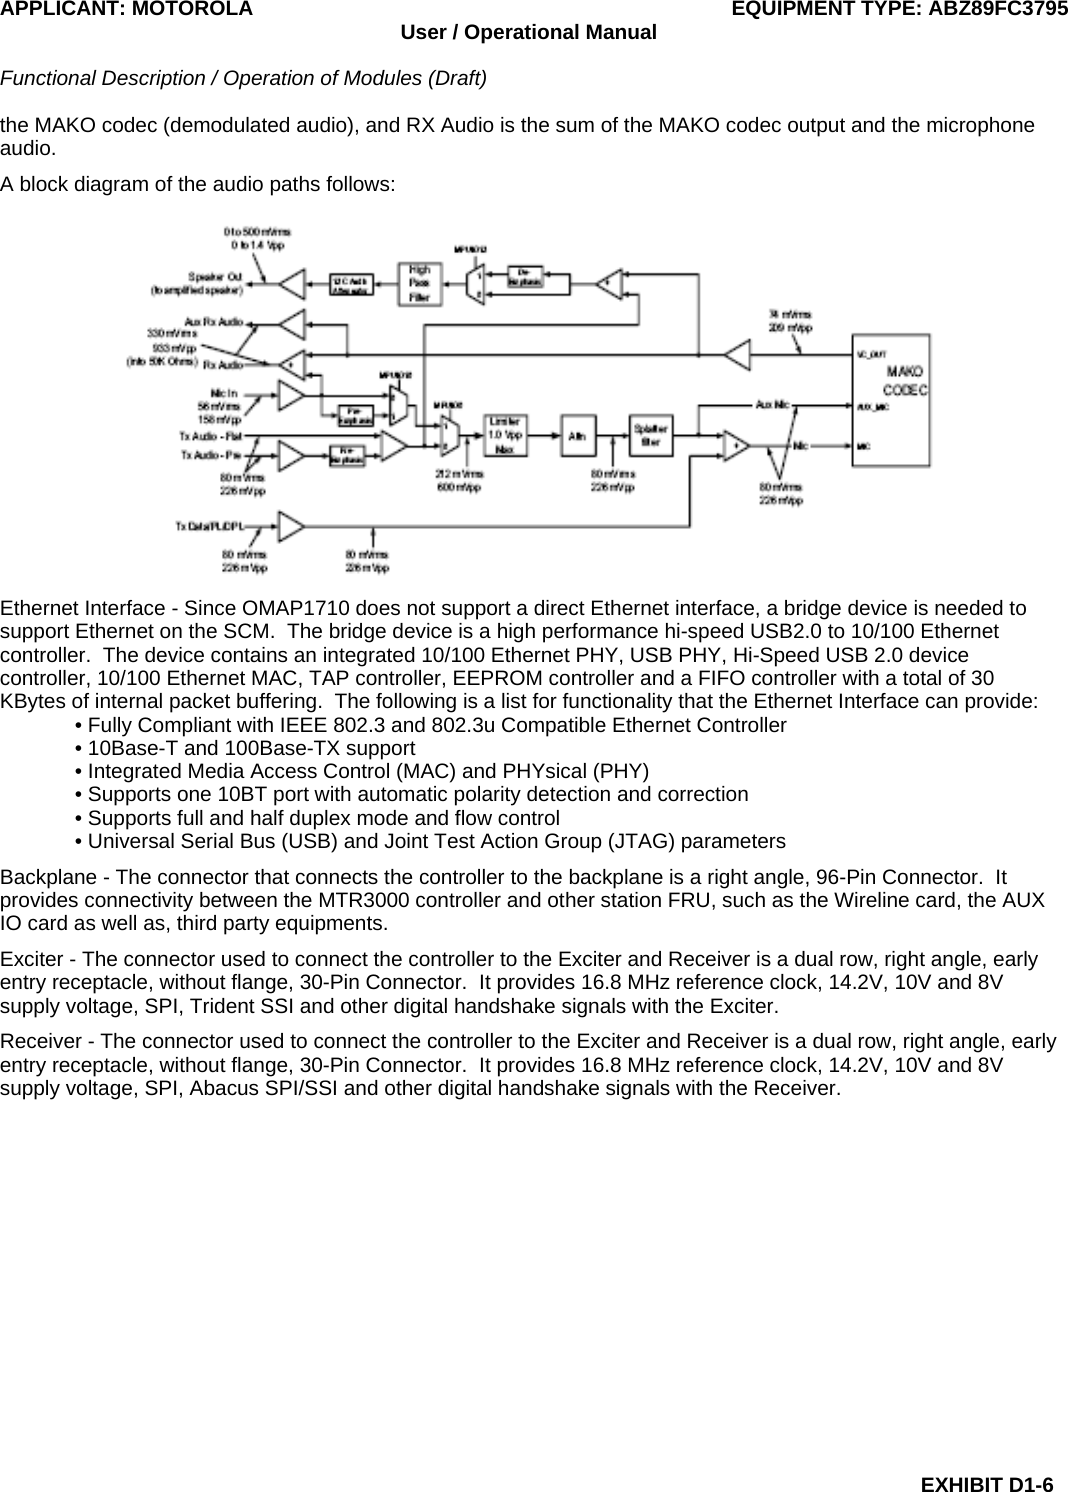 APPLICANT: MOTOROLA  EQUIPMENT TYPE: ABZ89FC3795 User / Operational Manual  Functional Description / Operation of Modules (Draft)  EXHIBIT D1-6 the MAKO codec (demodulated audio), and RX Audio is the sum of the MAKO codec output and the microphone audio. A block diagram of the audio paths follows:  Ethernet Interface - Since OMAP1710 does not support a direct Ethernet interface, a bridge device is needed to support Ethernet on the SCM.  The bridge device is a high performance hi-speed USB2.0 to 10/100 Ethernet controller.  The device contains an integrated 10/100 Ethernet PHY, USB PHY, Hi-Speed USB 2.0 device controller, 10/100 Ethernet MAC, TAP controller, EEPROM controller and a FIFO controller with a total of 30 KBytes of internal packet buffering.  The following is a list for functionality that the Ethernet Interface can provide: • Fully Compliant with IEEE 802.3 and 802.3u Compatible Ethernet Controller • 10Base-T and 100Base-TX support • Integrated Media Access Control (MAC) and PHYsical (PHY) • Supports one 10BT port with automatic polarity detection and correction • Supports full and half duplex mode and flow control • Universal Serial Bus (USB) and Joint Test Action Group (JTAG) parameters Backplane - The connector that connects the controller to the backplane is a right angle, 96-Pin Connector.  It provides connectivity between the MTR3000 controller and other station FRU, such as the Wireline card, the AUX IO card as well as, third party equipments. Exciter - The connector used to connect the controller to the Exciter and Receiver is a dual row, right angle, early entry receptacle, without flange, 30-Pin Connector.  It provides 16.8 MHz reference clock, 14.2V, 10V and 8V supply voltage, SPI, Trident SSI and other digital handshake signals with the Exciter. Receiver - The connector used to connect the controller to the Exciter and Receiver is a dual row, right angle, early entry receptacle, without flange, 30-Pin Connector.  It provides 16.8 MHz reference clock, 14.2V, 10V and 8V supply voltage, SPI, Abacus SPI/SSI and other digital handshake signals with the Receiver.  